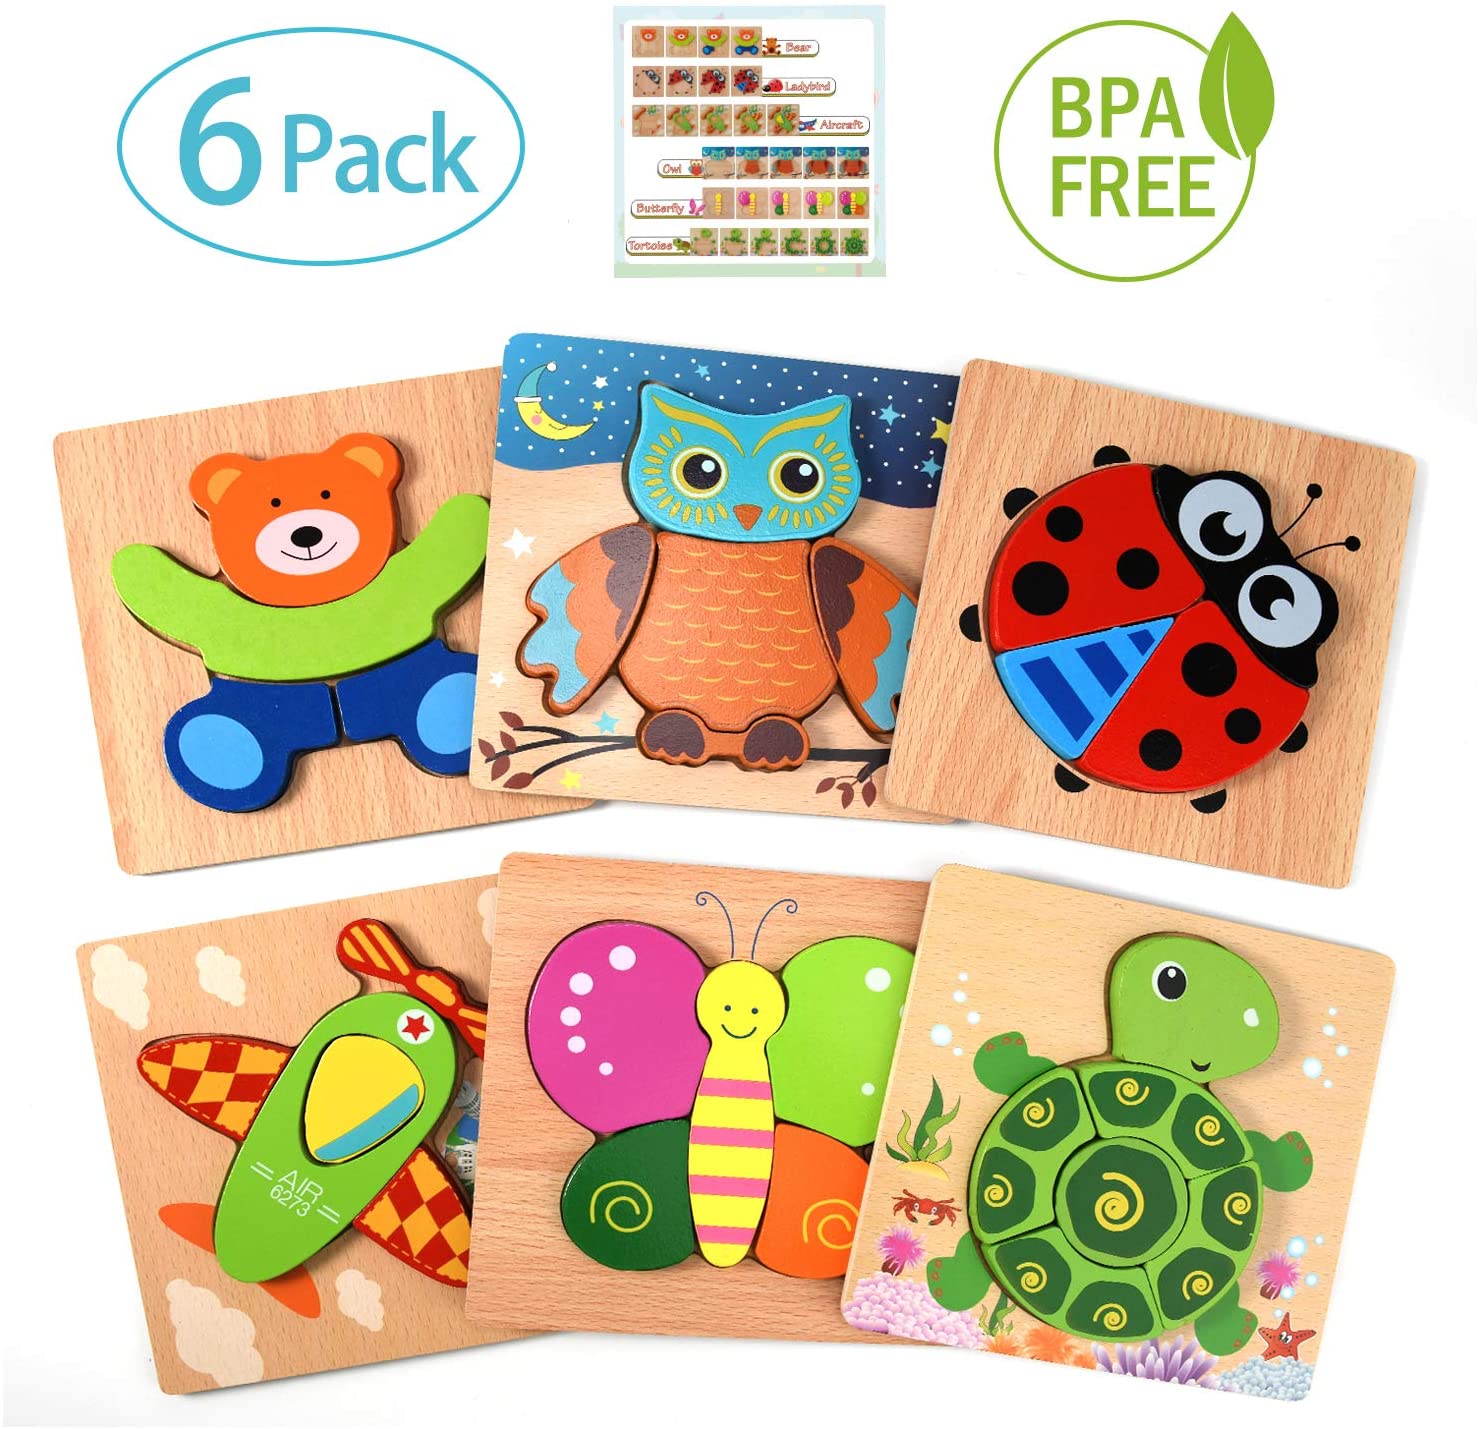 AMAZON: Wooden Puzzles for Toddlers, 6 Pack – 50 % OFF! - Deals Finders